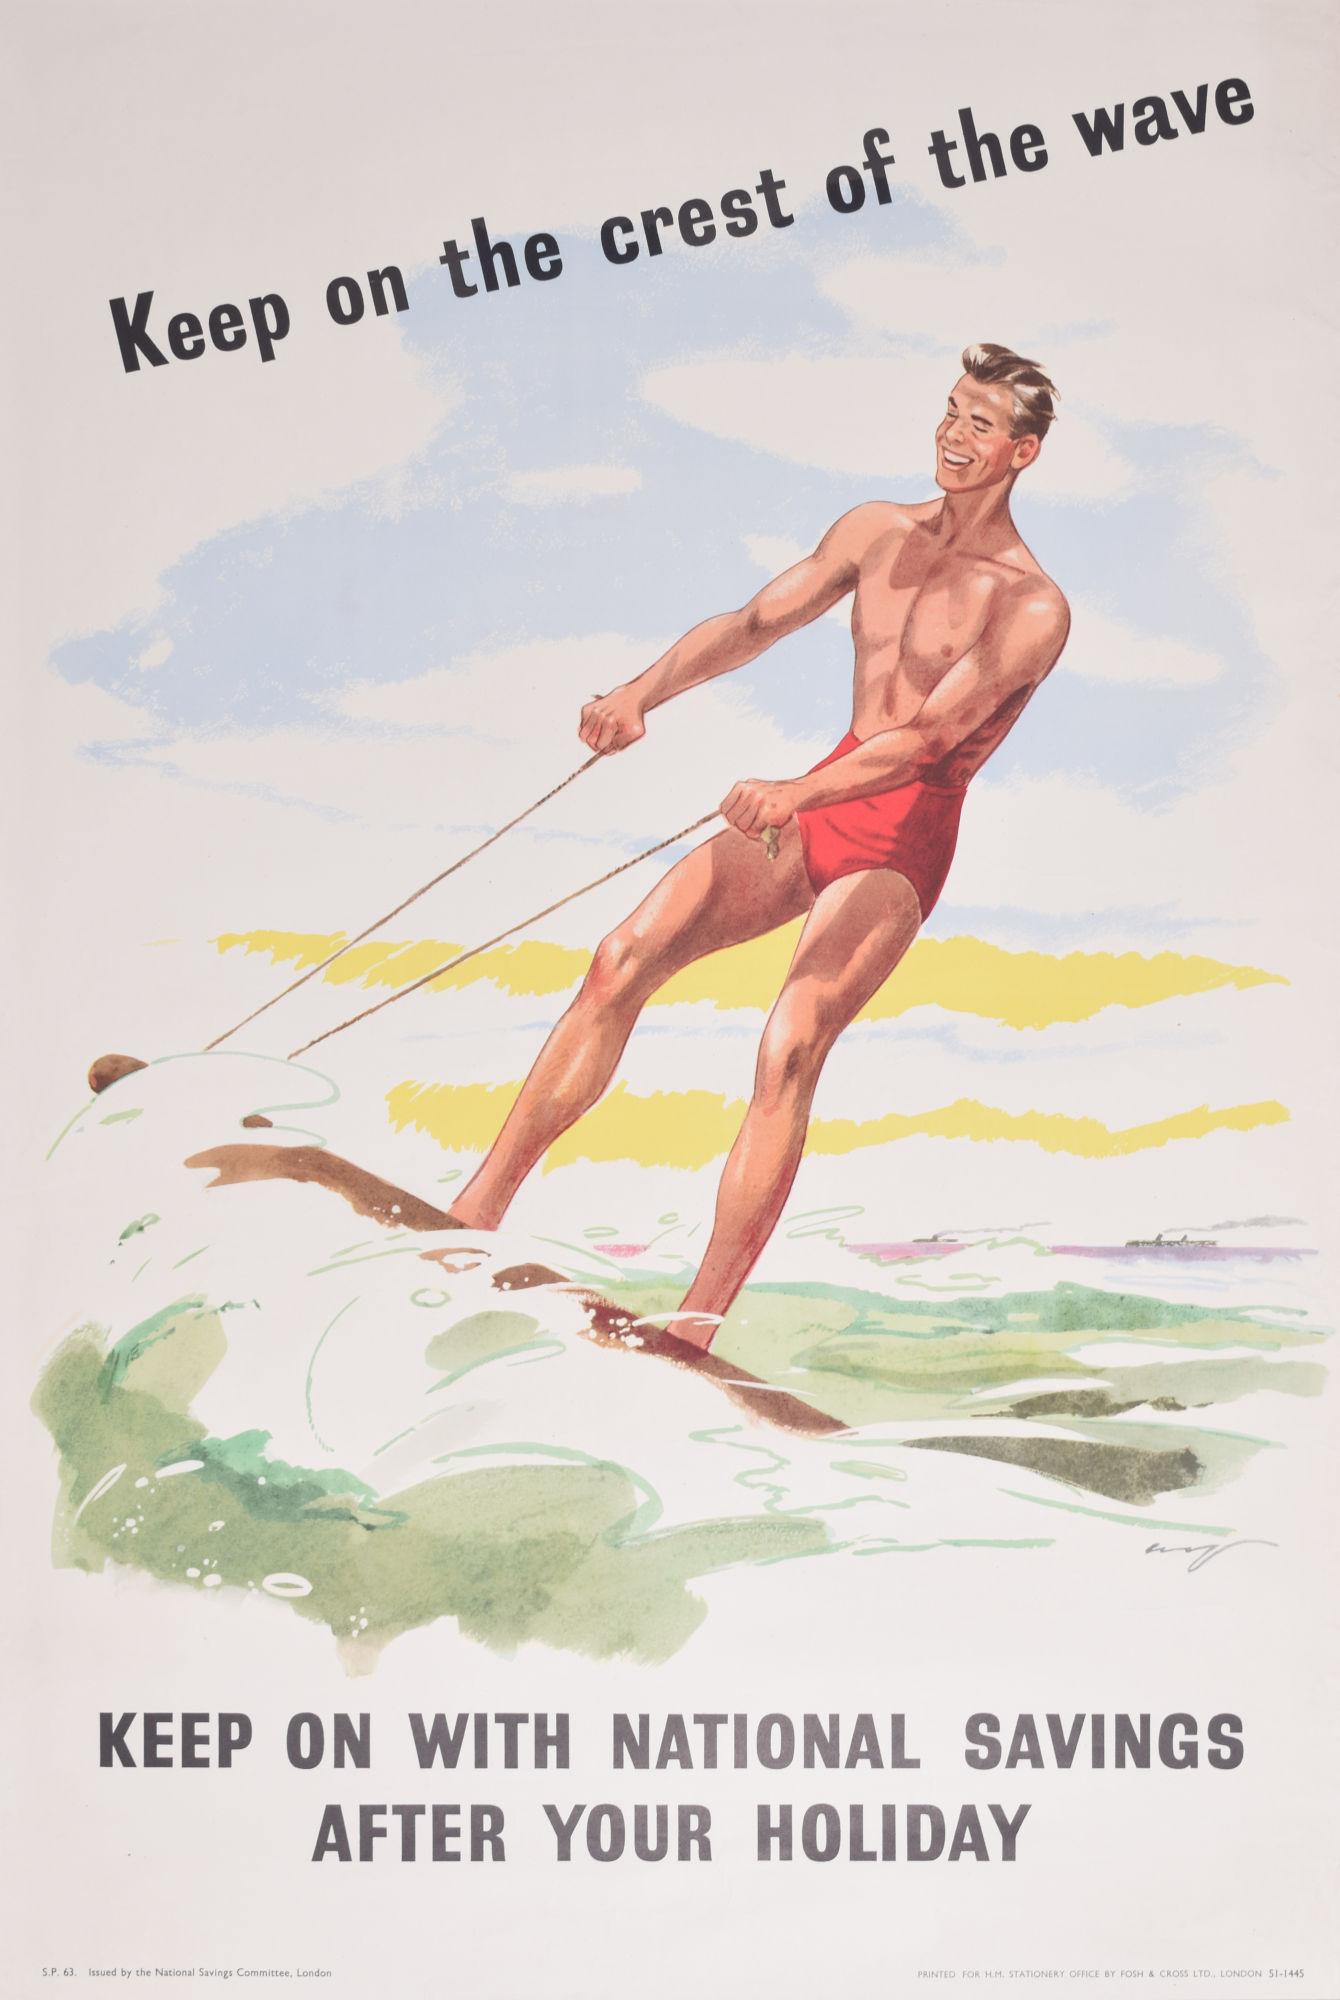 Surfing Keep on the Crest of the wave original vintage poster - Print by Unknown